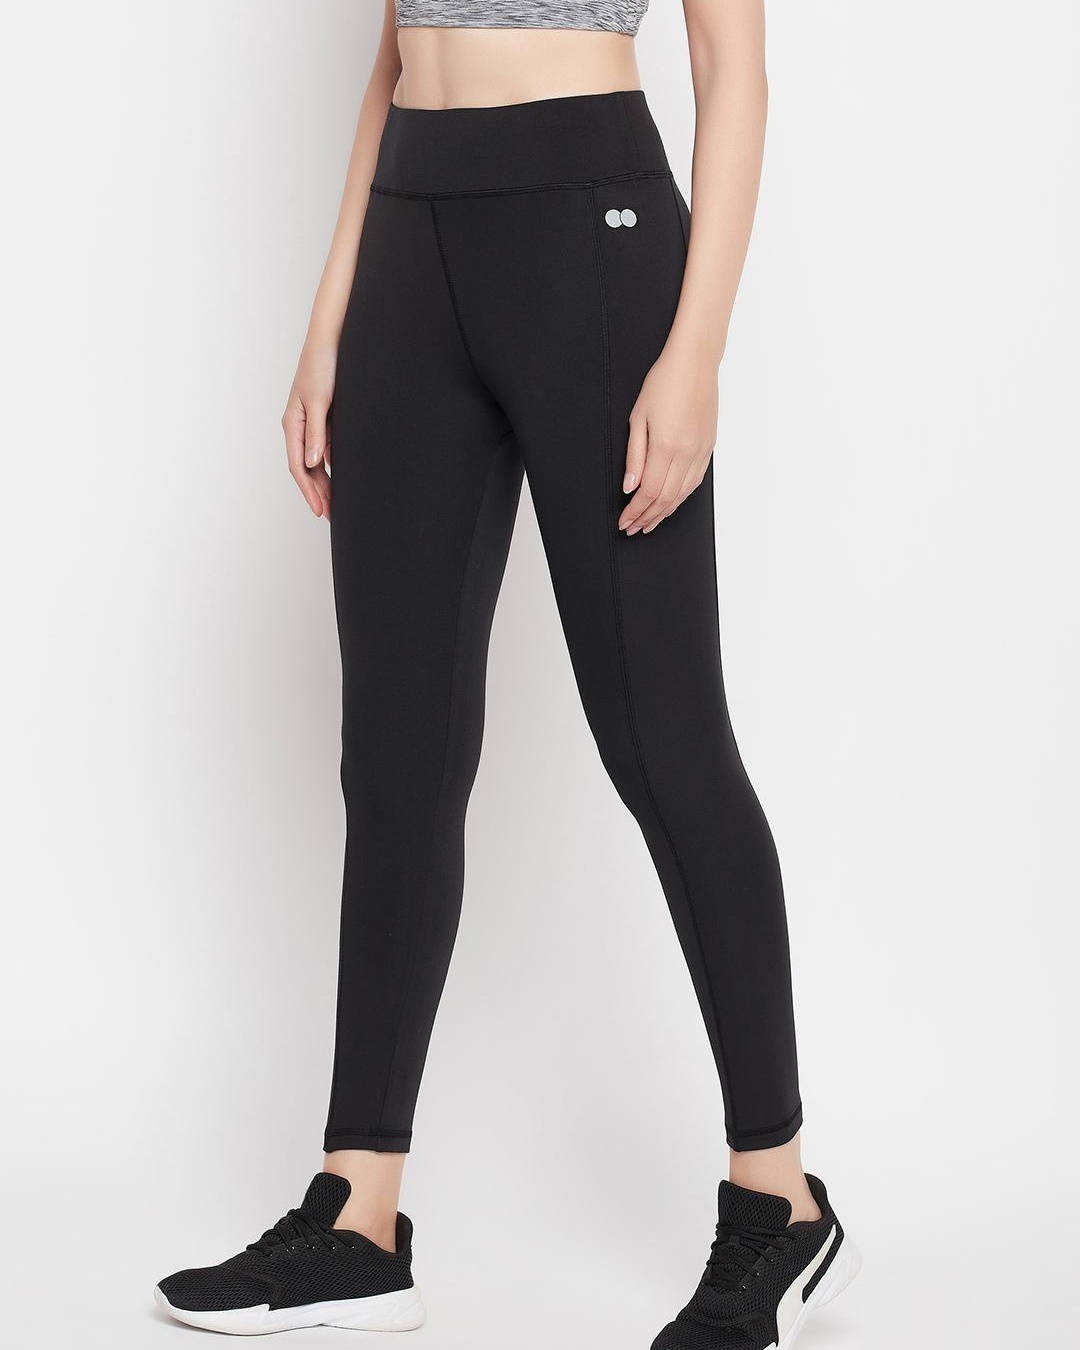 Women's Cycling Tights & Pants | Terry